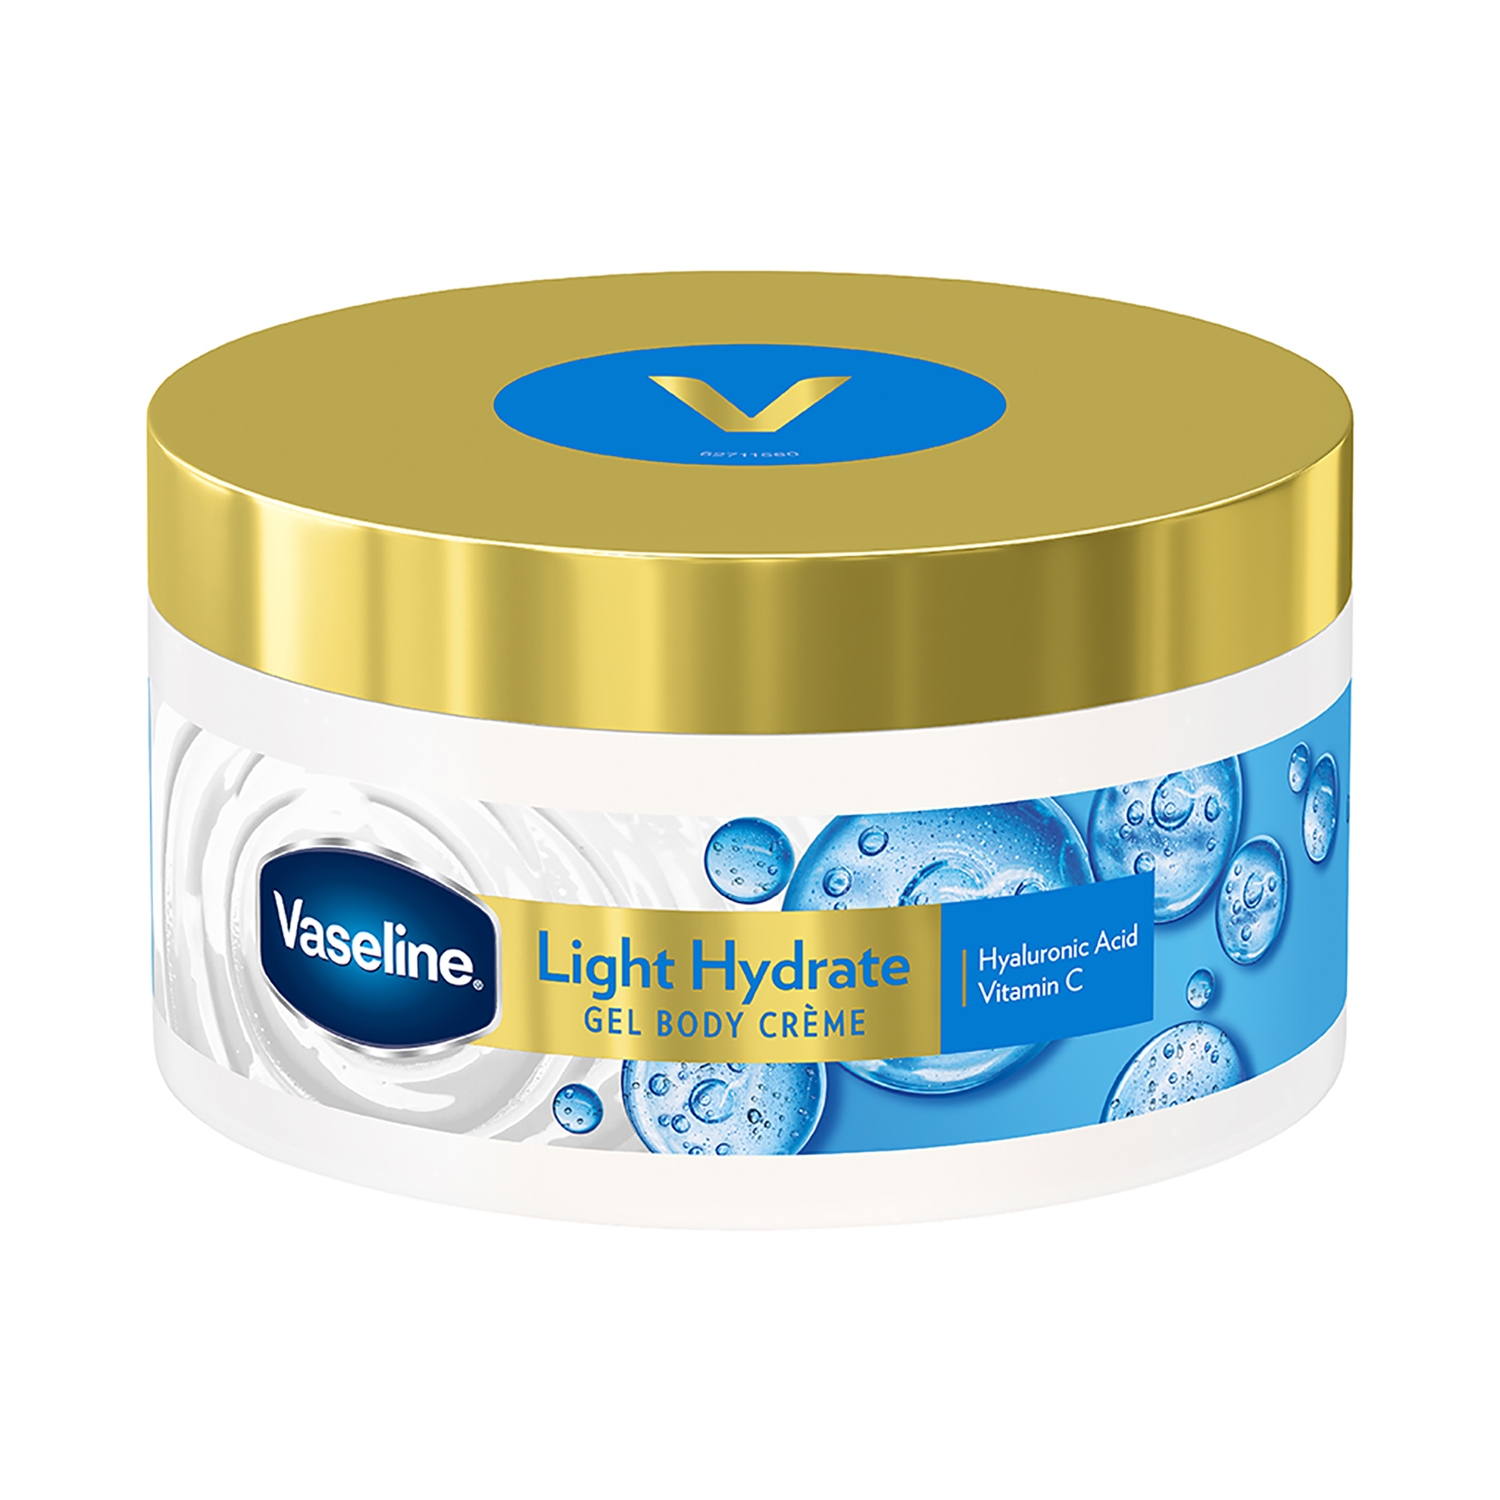 Vaseline | Vaseline Light Hydrate Gel Body Creme with Hyaluronic Acid & Vitamin C for Hydrated Skin (180g)